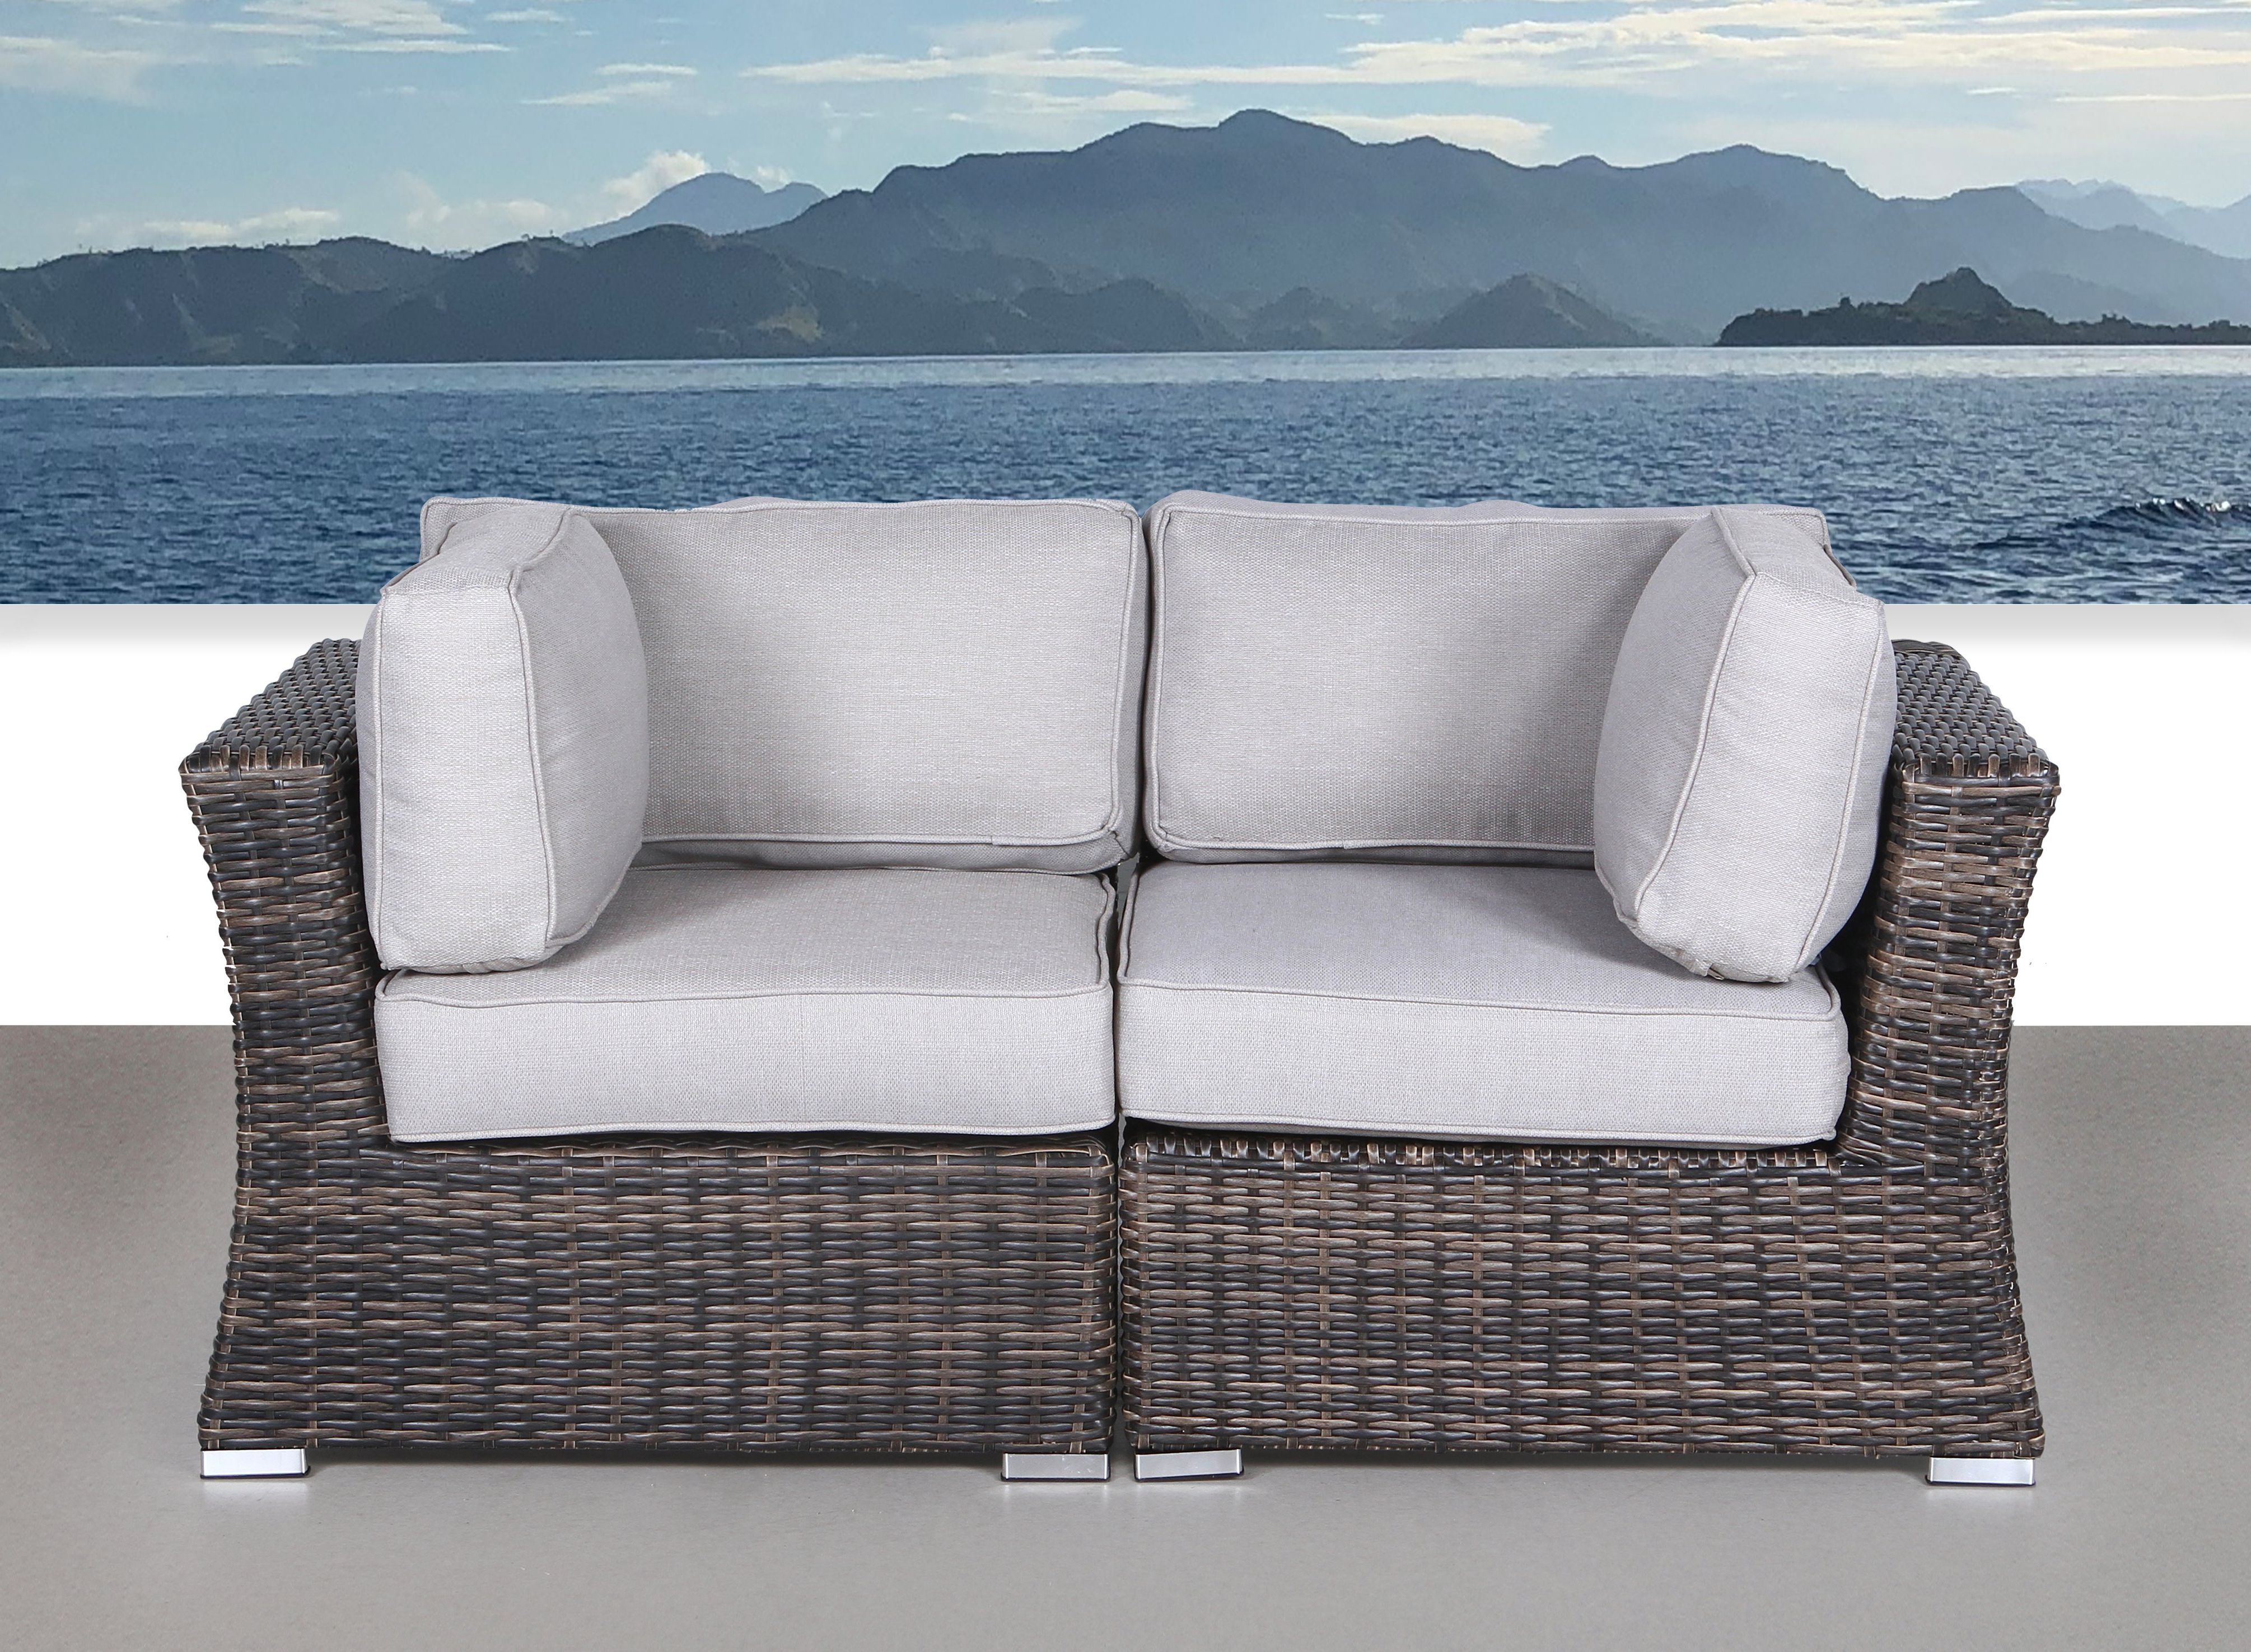 Belton Loveseats With Cushions For Widely Used Huddleson Contemporary Loveseat With Cushion (View 3 of 25)